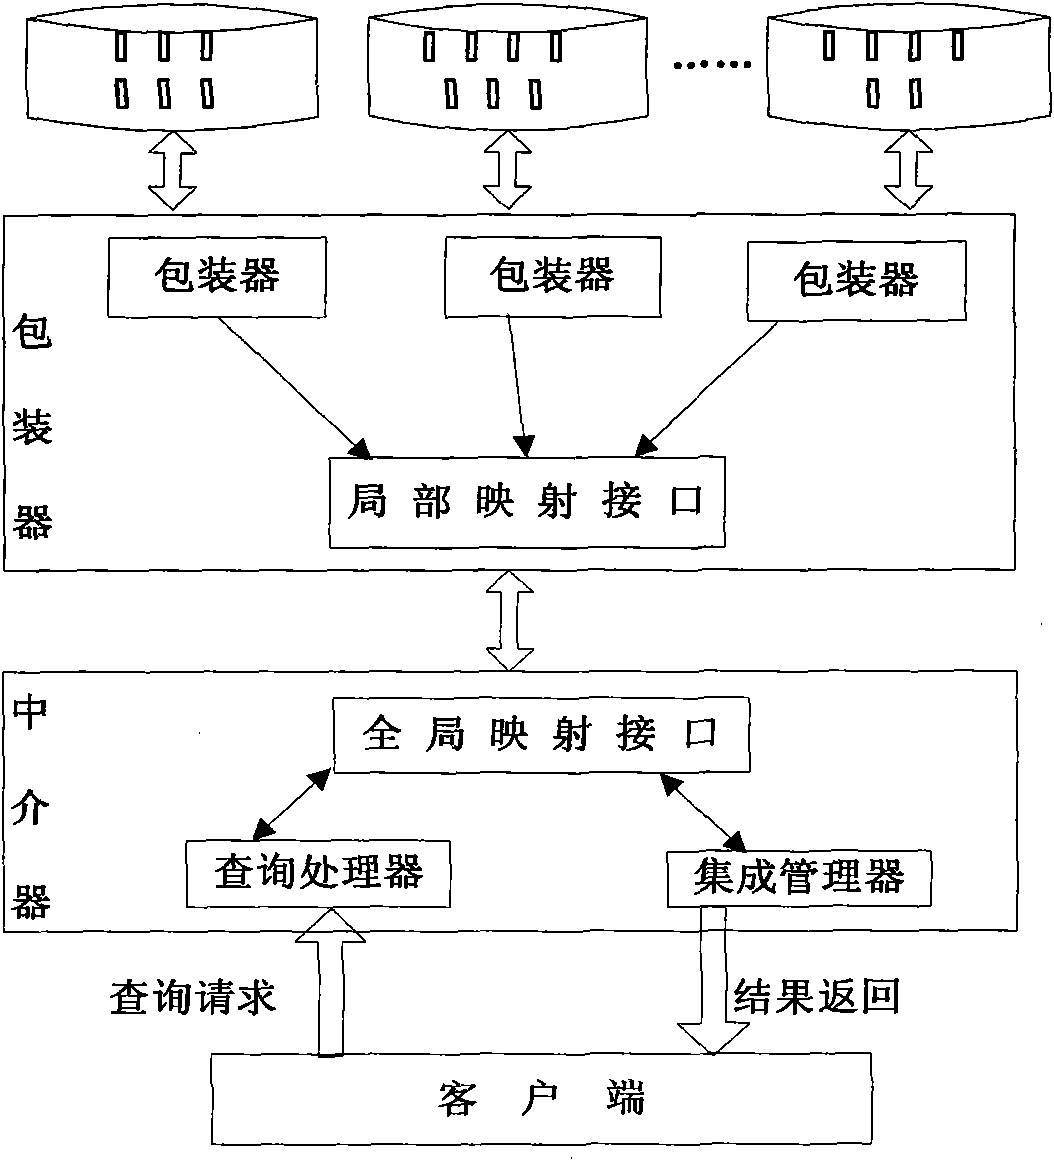 Heterogeneous geographic data query system and method